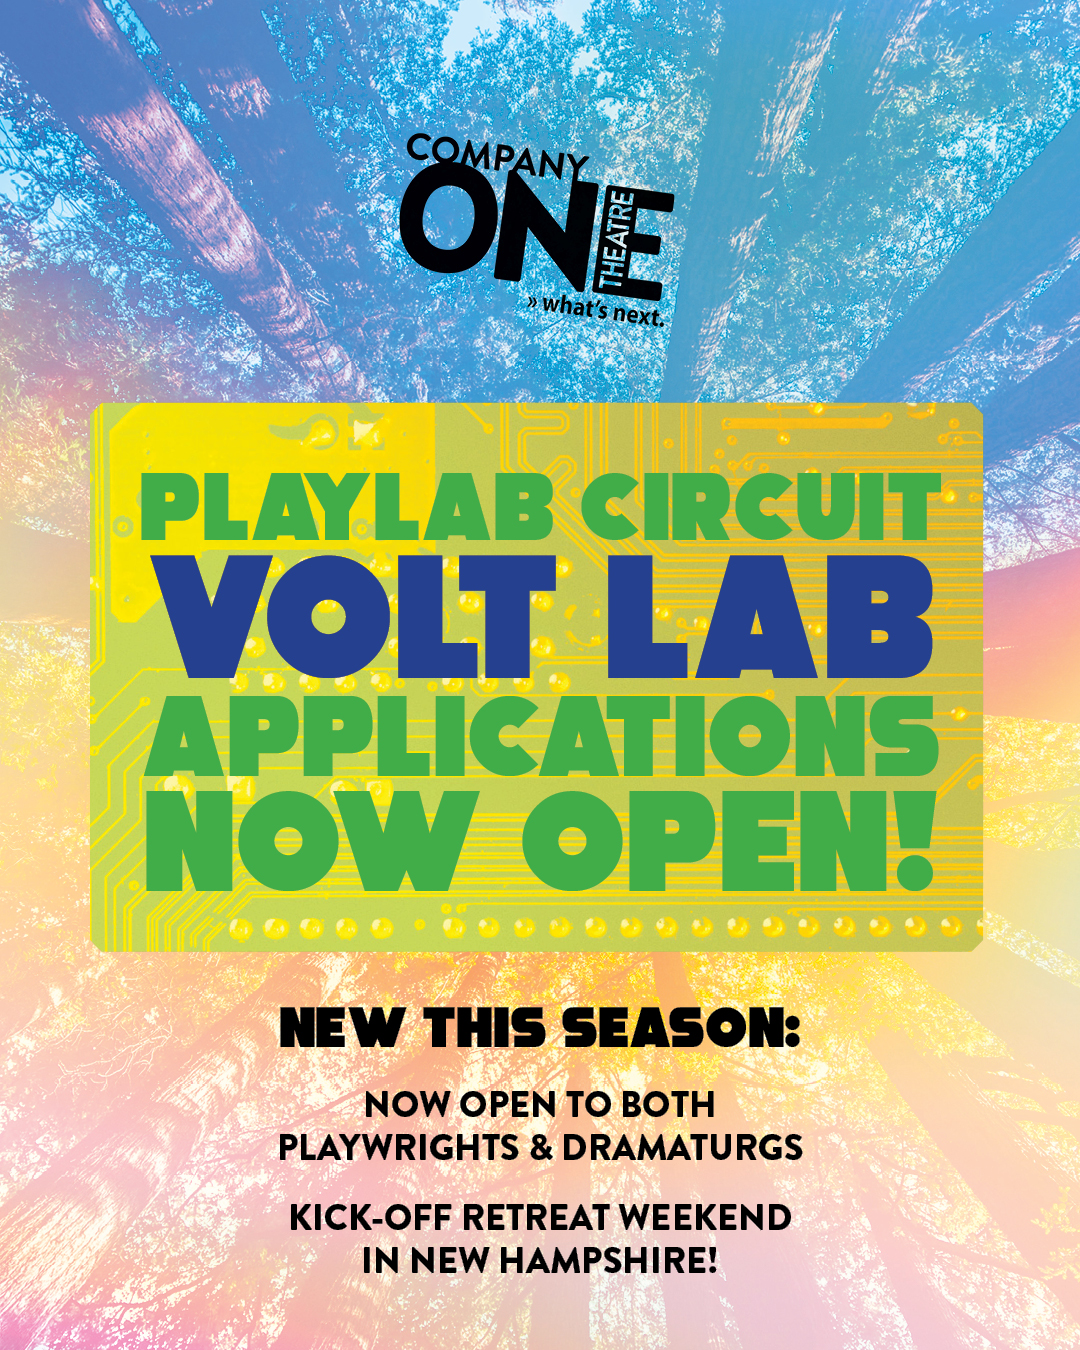 PlayLab Circuit Volt Lab Applications Now Open!